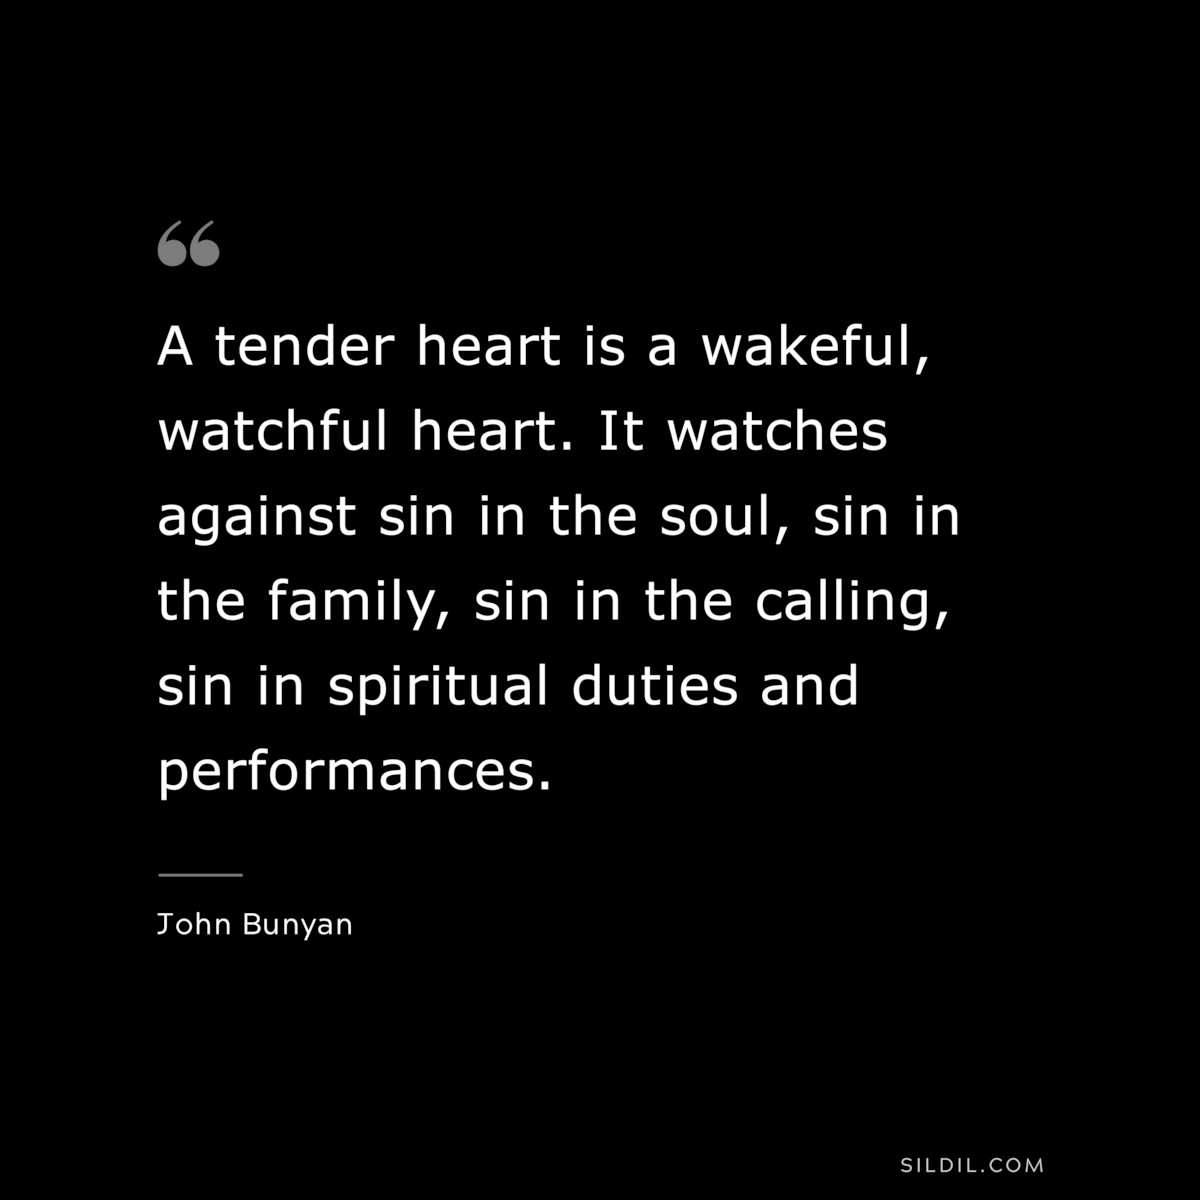 A tender heart is a wakeful, watchful heart. It watches against sin in the soul, sin in the family, sin in the calling, sin in spiritual duties and performances. ― John Bunyan